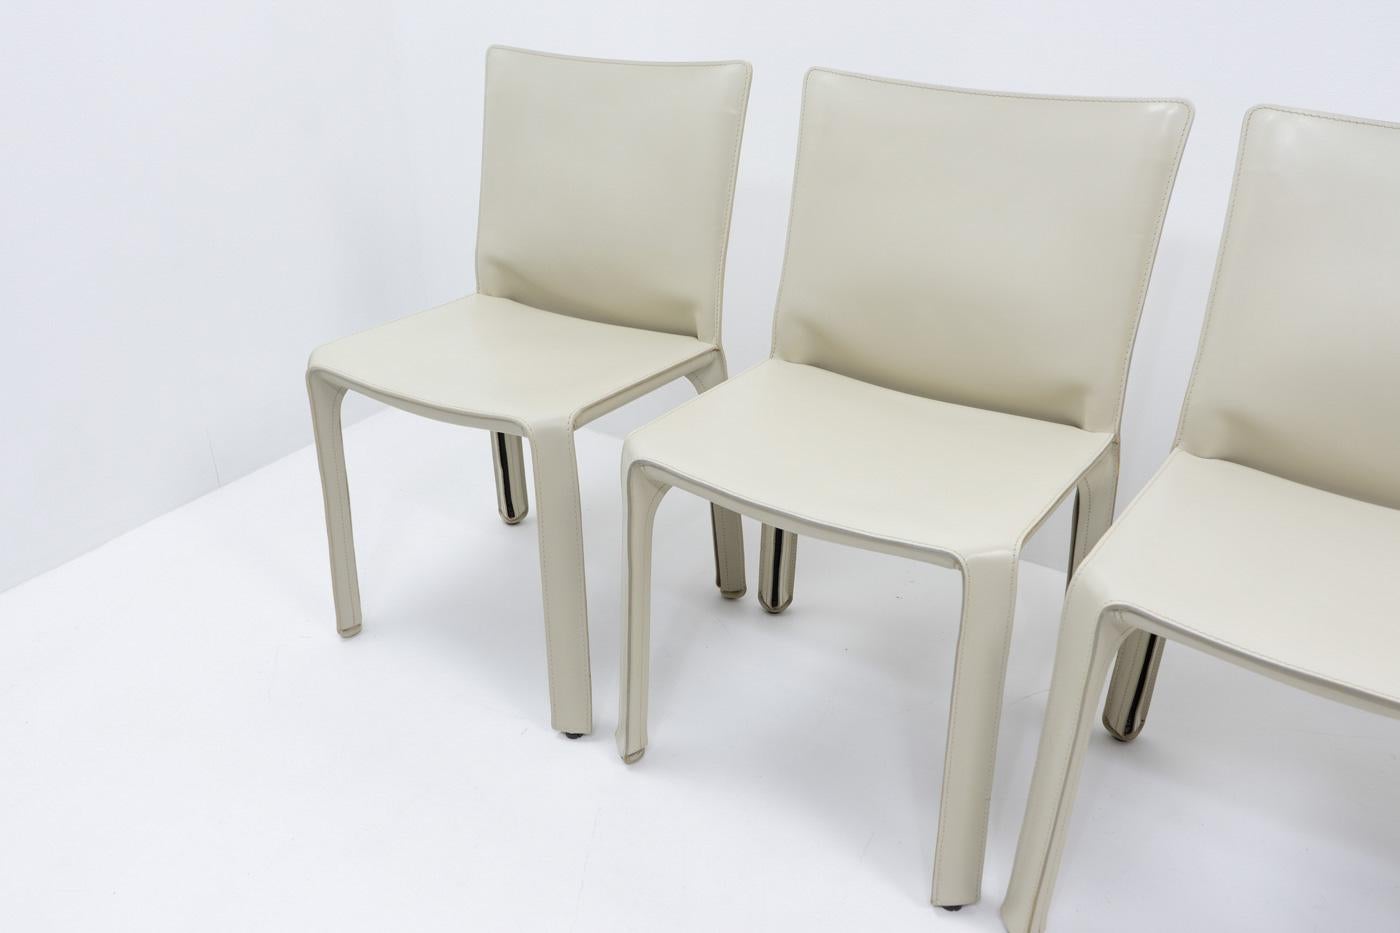 Cab 412 Chairs in Cream Leather by Mario Bellini for Cassina, Set of 4 For Sale 1